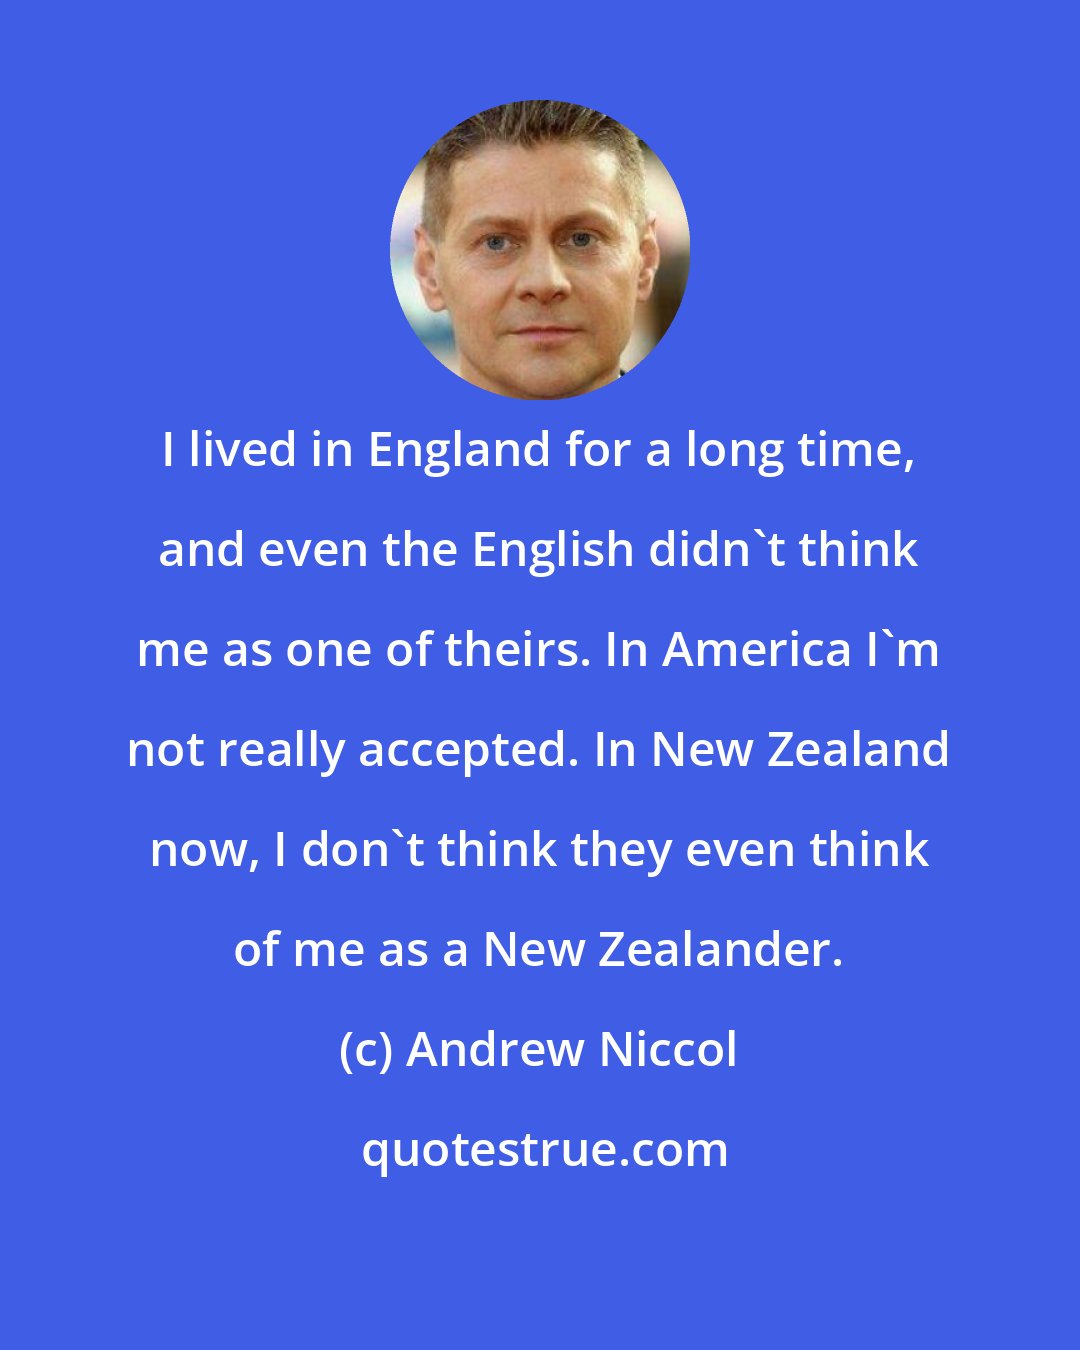 Andrew Niccol: I lived in England for a long time, and even the English didn't think me as one of theirs. In America I'm not really accepted. In New Zealand now, I don't think they even think of me as a New Zealander.